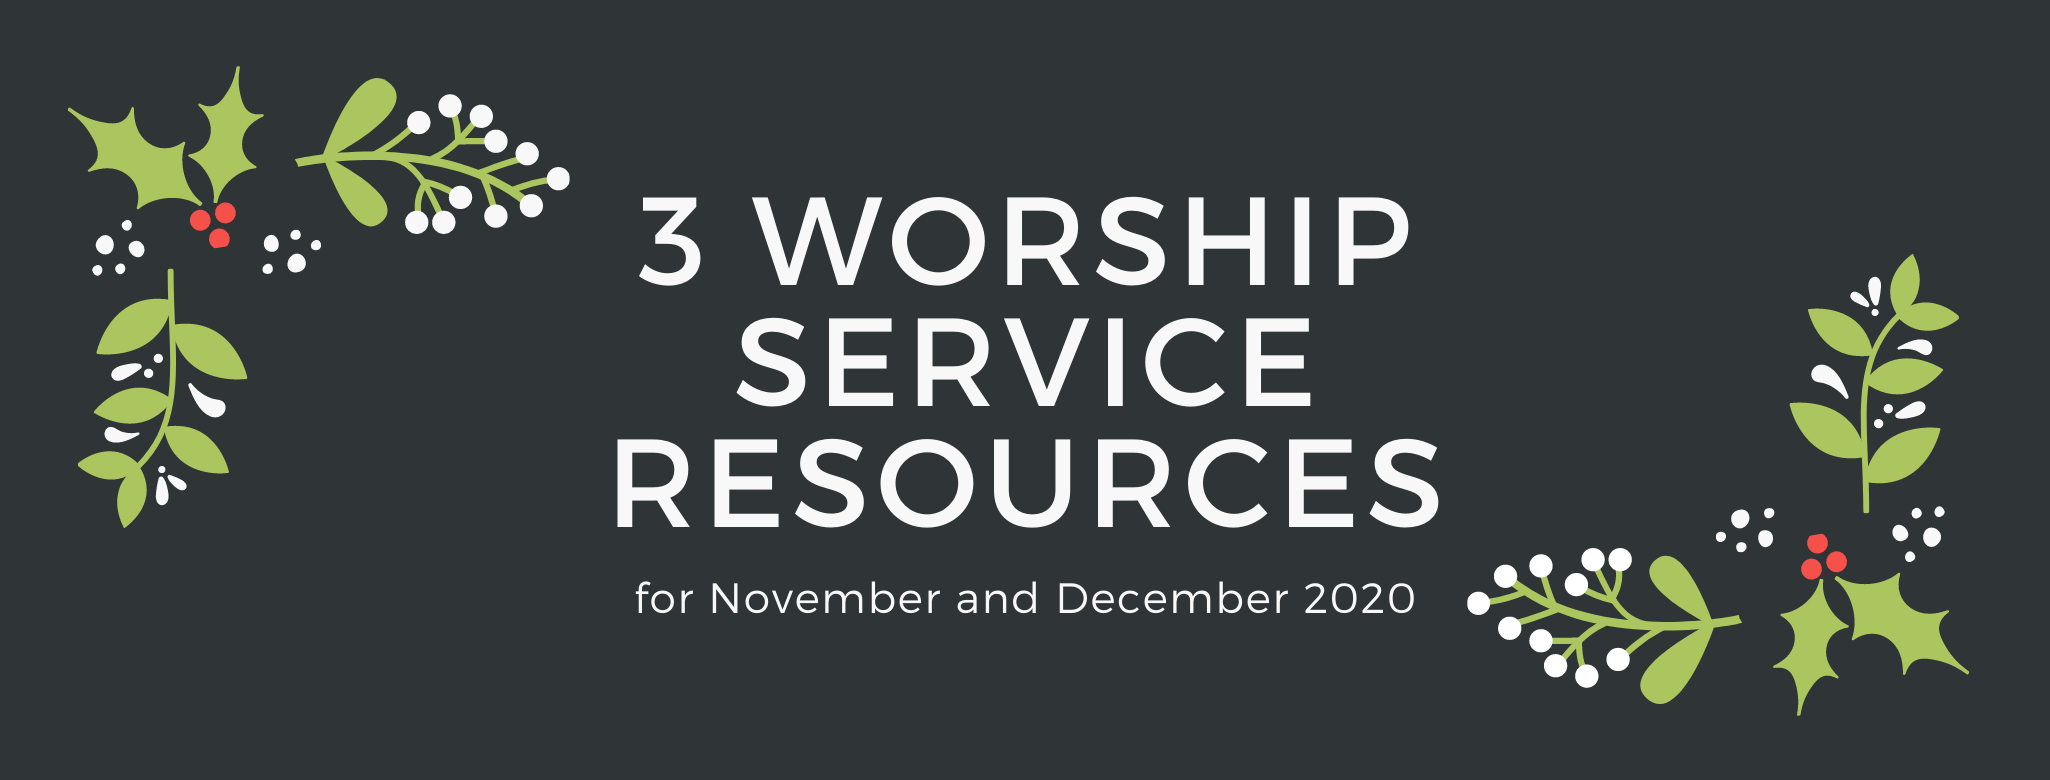 3 Online Worship Resources for RMC Churches